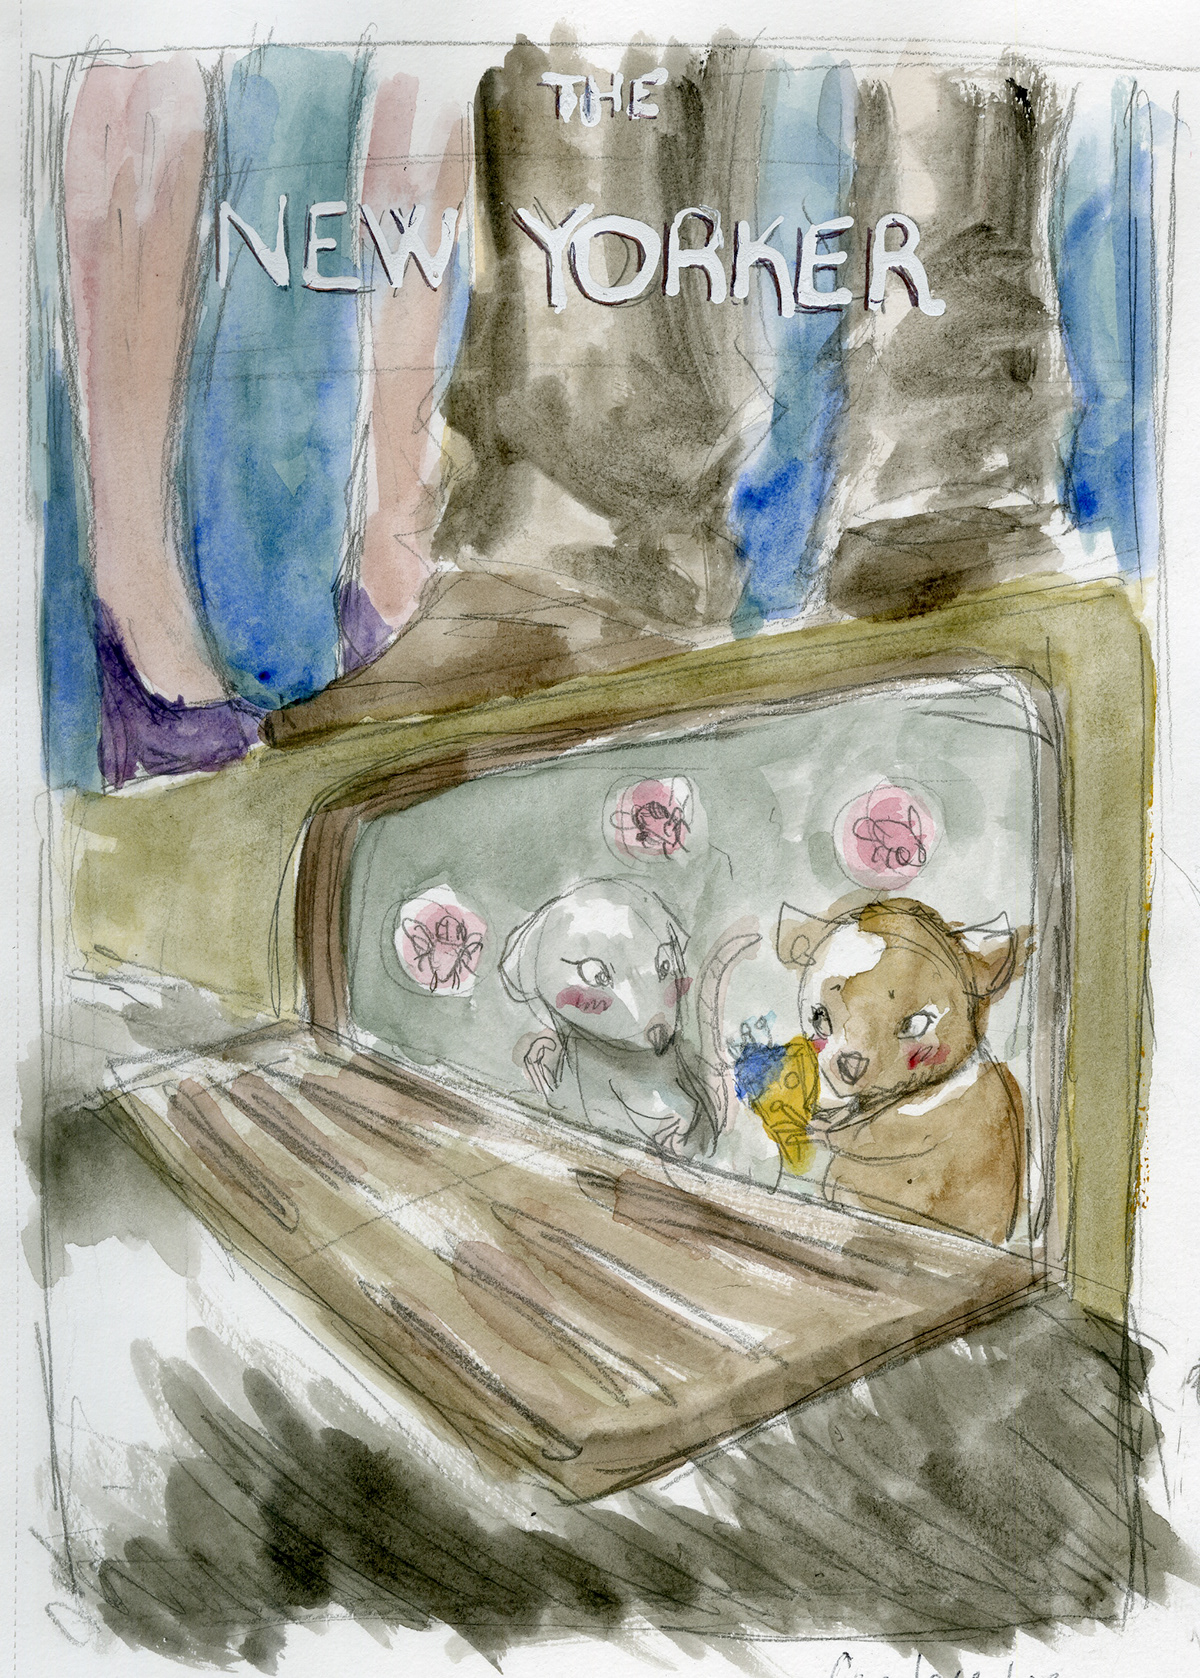 Rats rat mouse mice sewer gutter grate Street sidewalk The New Yorker cover Valentine's Day Cheese Bouquet